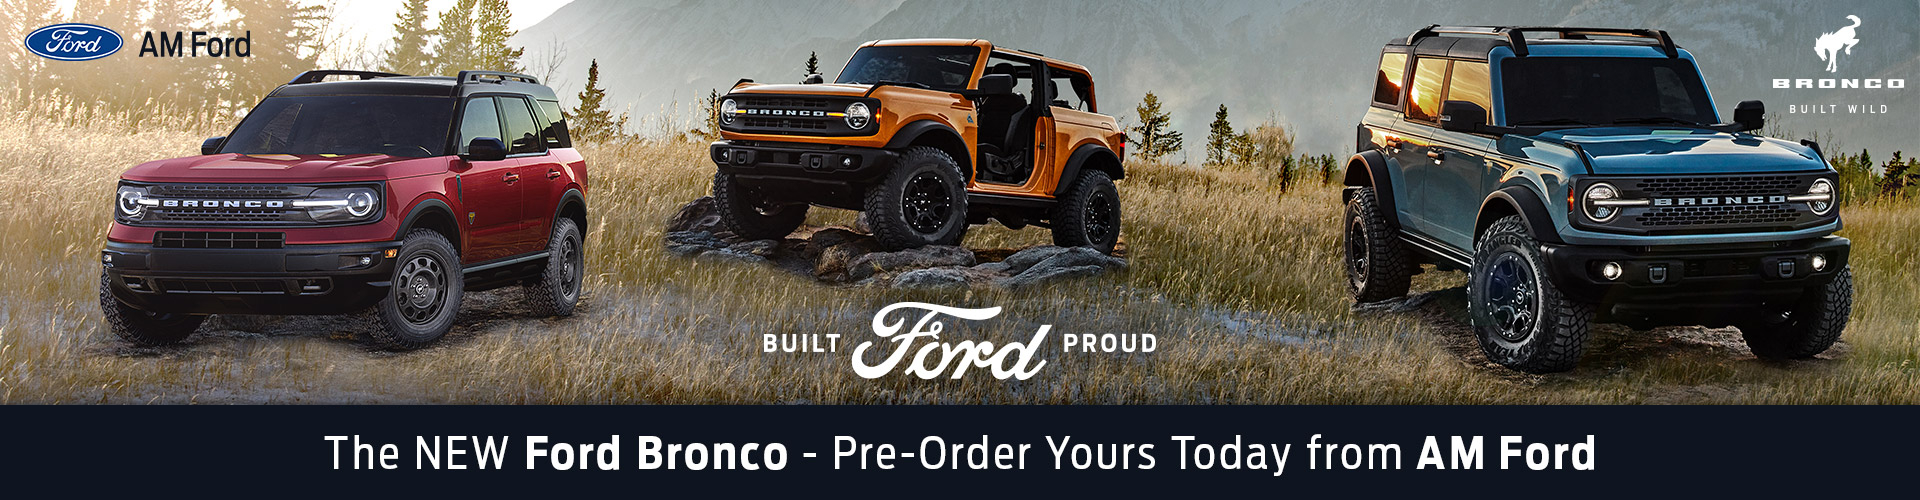 AM Ford - Ford Bronco Pre-Order